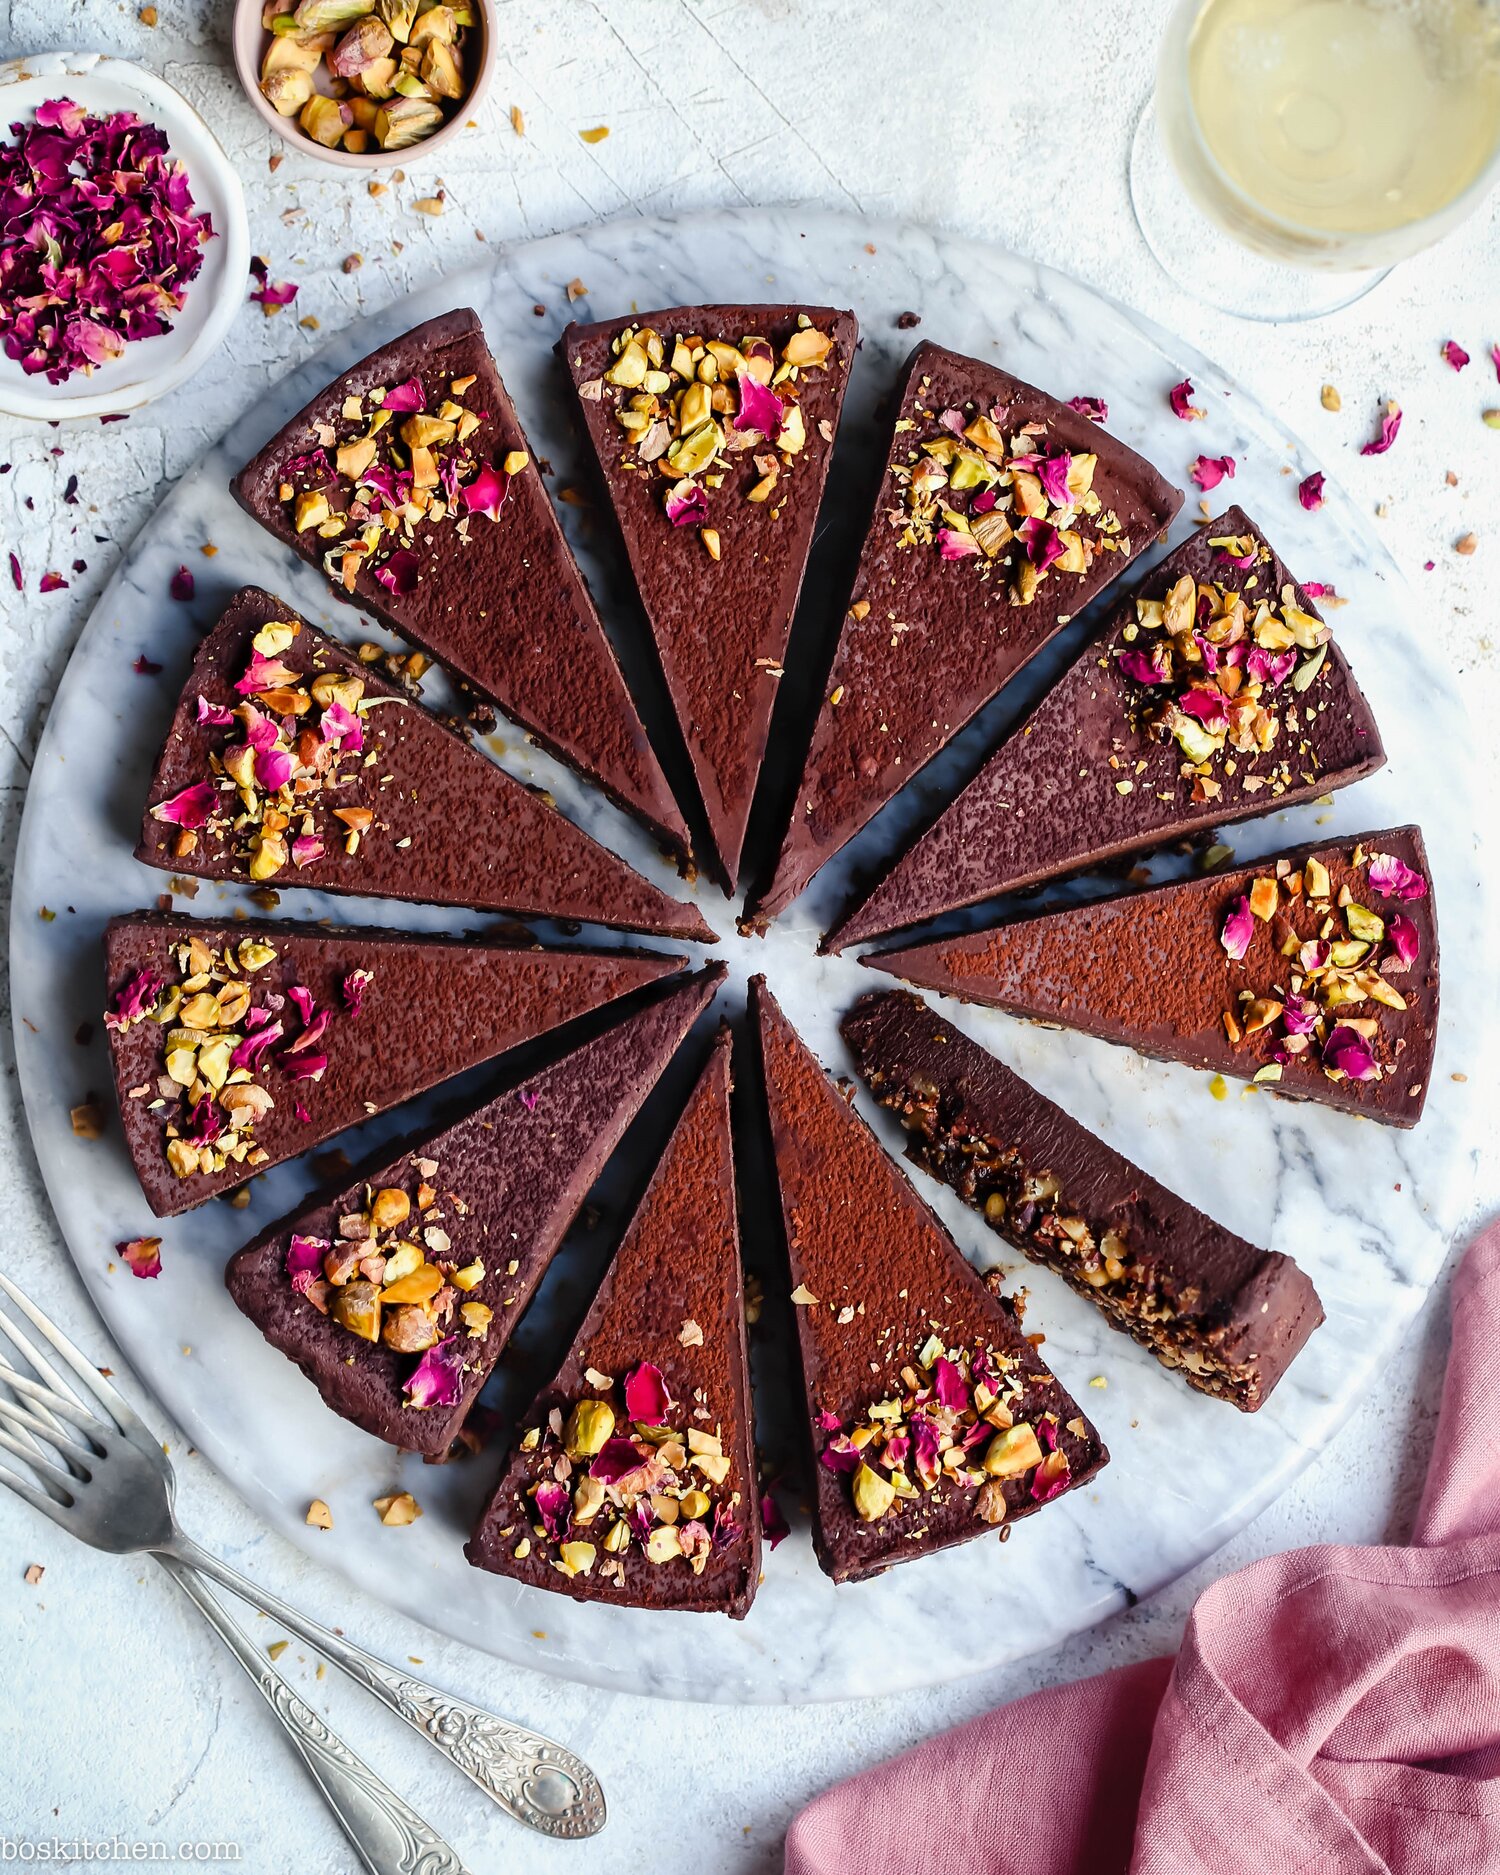 A chocolate cake cut up into equal sections, decorated with pink and white petals, one slice is lying on its side